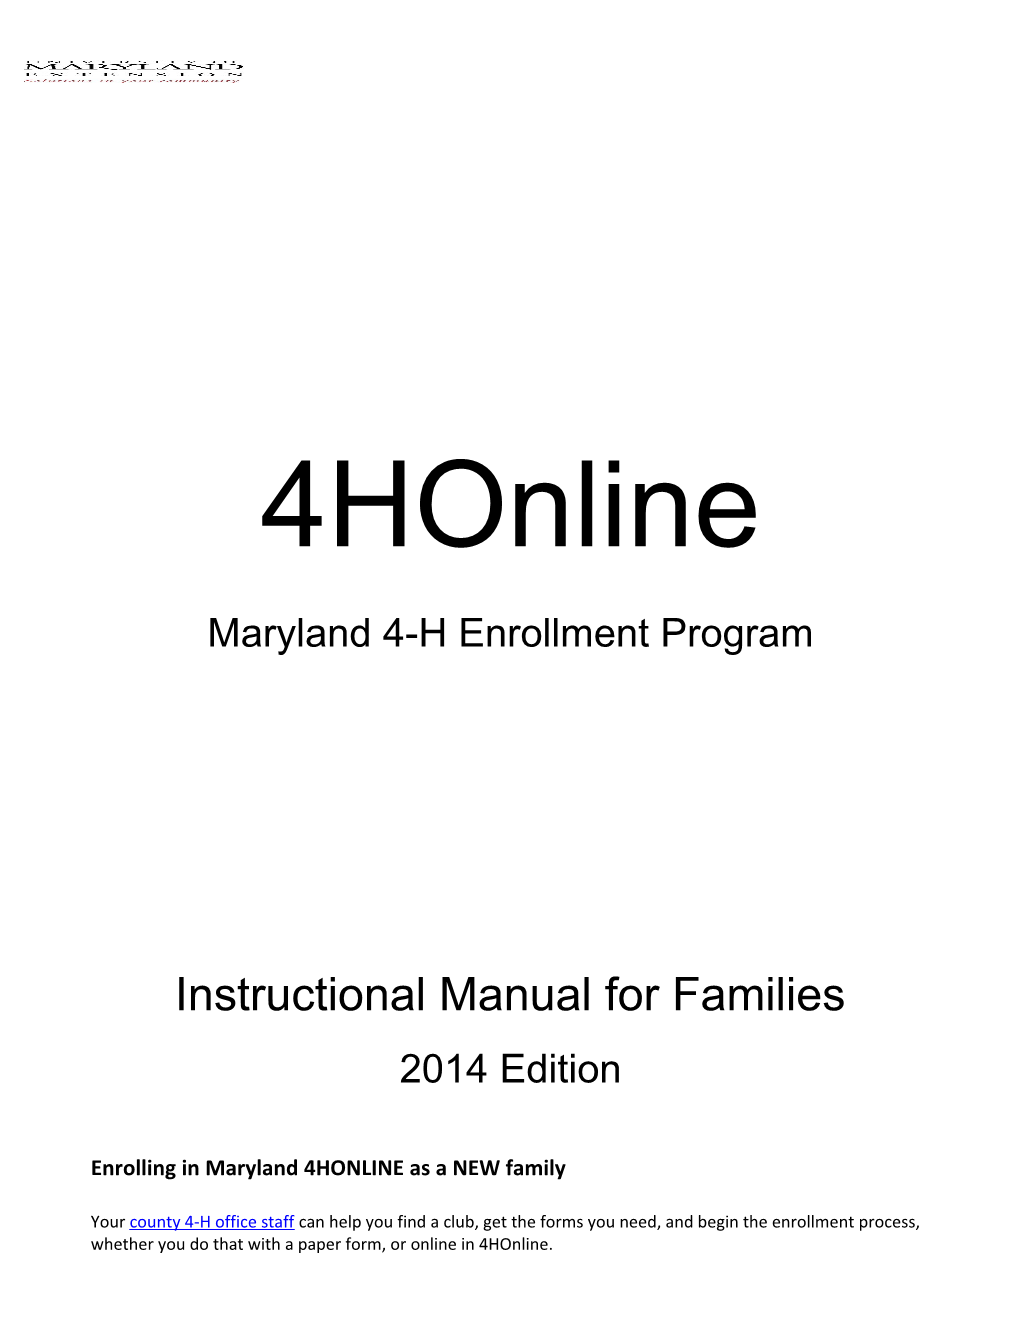 Enrolling in Maryland 4HONLINE As a NEW Family